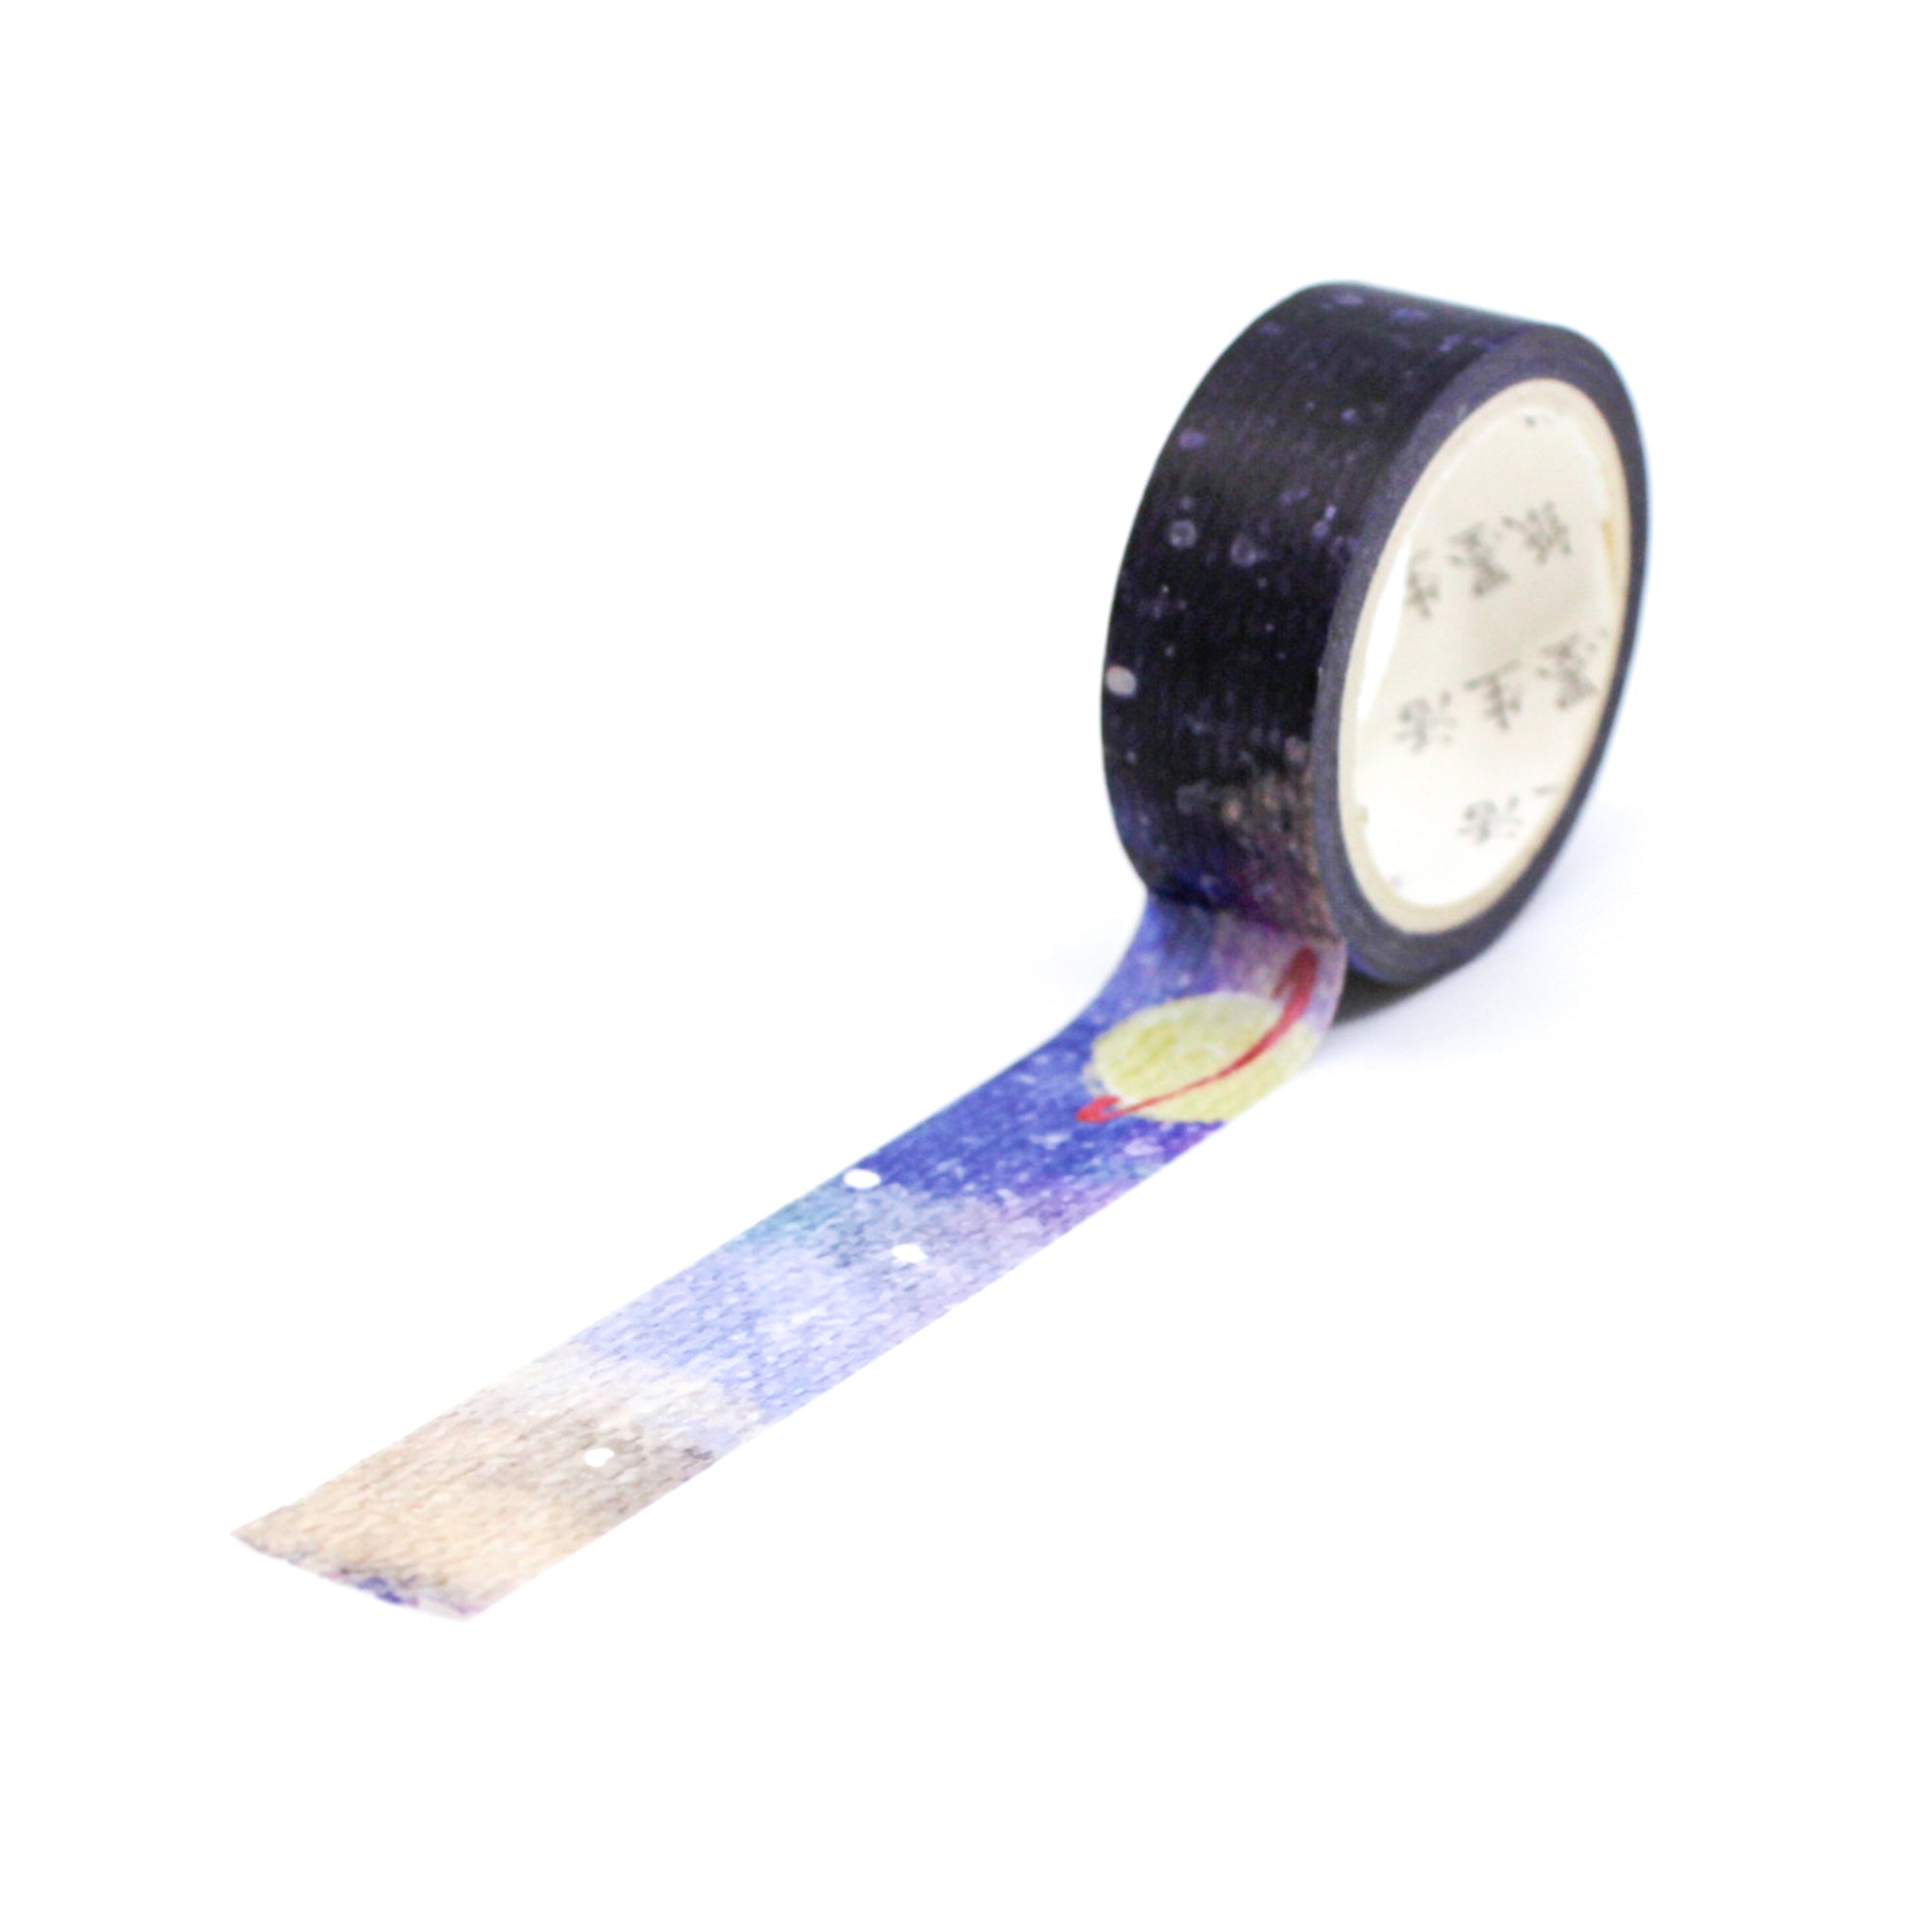 This Saturn outer space sky watercolor washi tape is the perfect addition to your washi collection. The simplicity of the pattern is perfect for accenting and matching any project's theme while adding a beautiful and interesting pattern. This tape is sold at BBB Supplies Craft Shop.